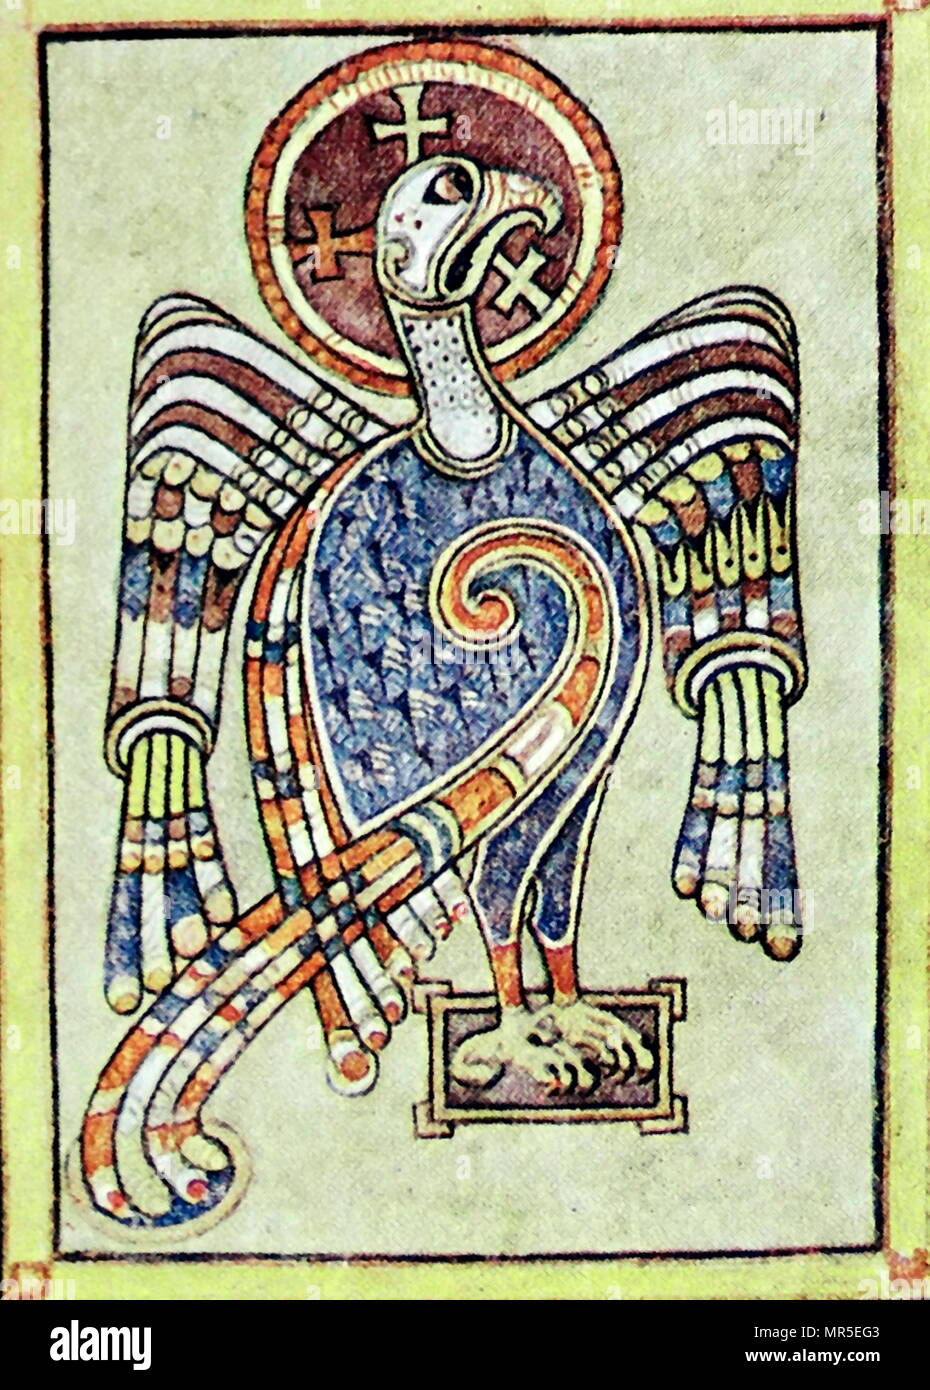 detail of an illuminated page showing a vulture or eagle from the Book of Kells.  The Book of Kells is an illuminated manuscript Gospel book in Latin, containing the four Gospels of the New Testament together with various prefatory texts and tables. It was created in a Columban monastery in Ireland, c. 800 AD. Stock Photo